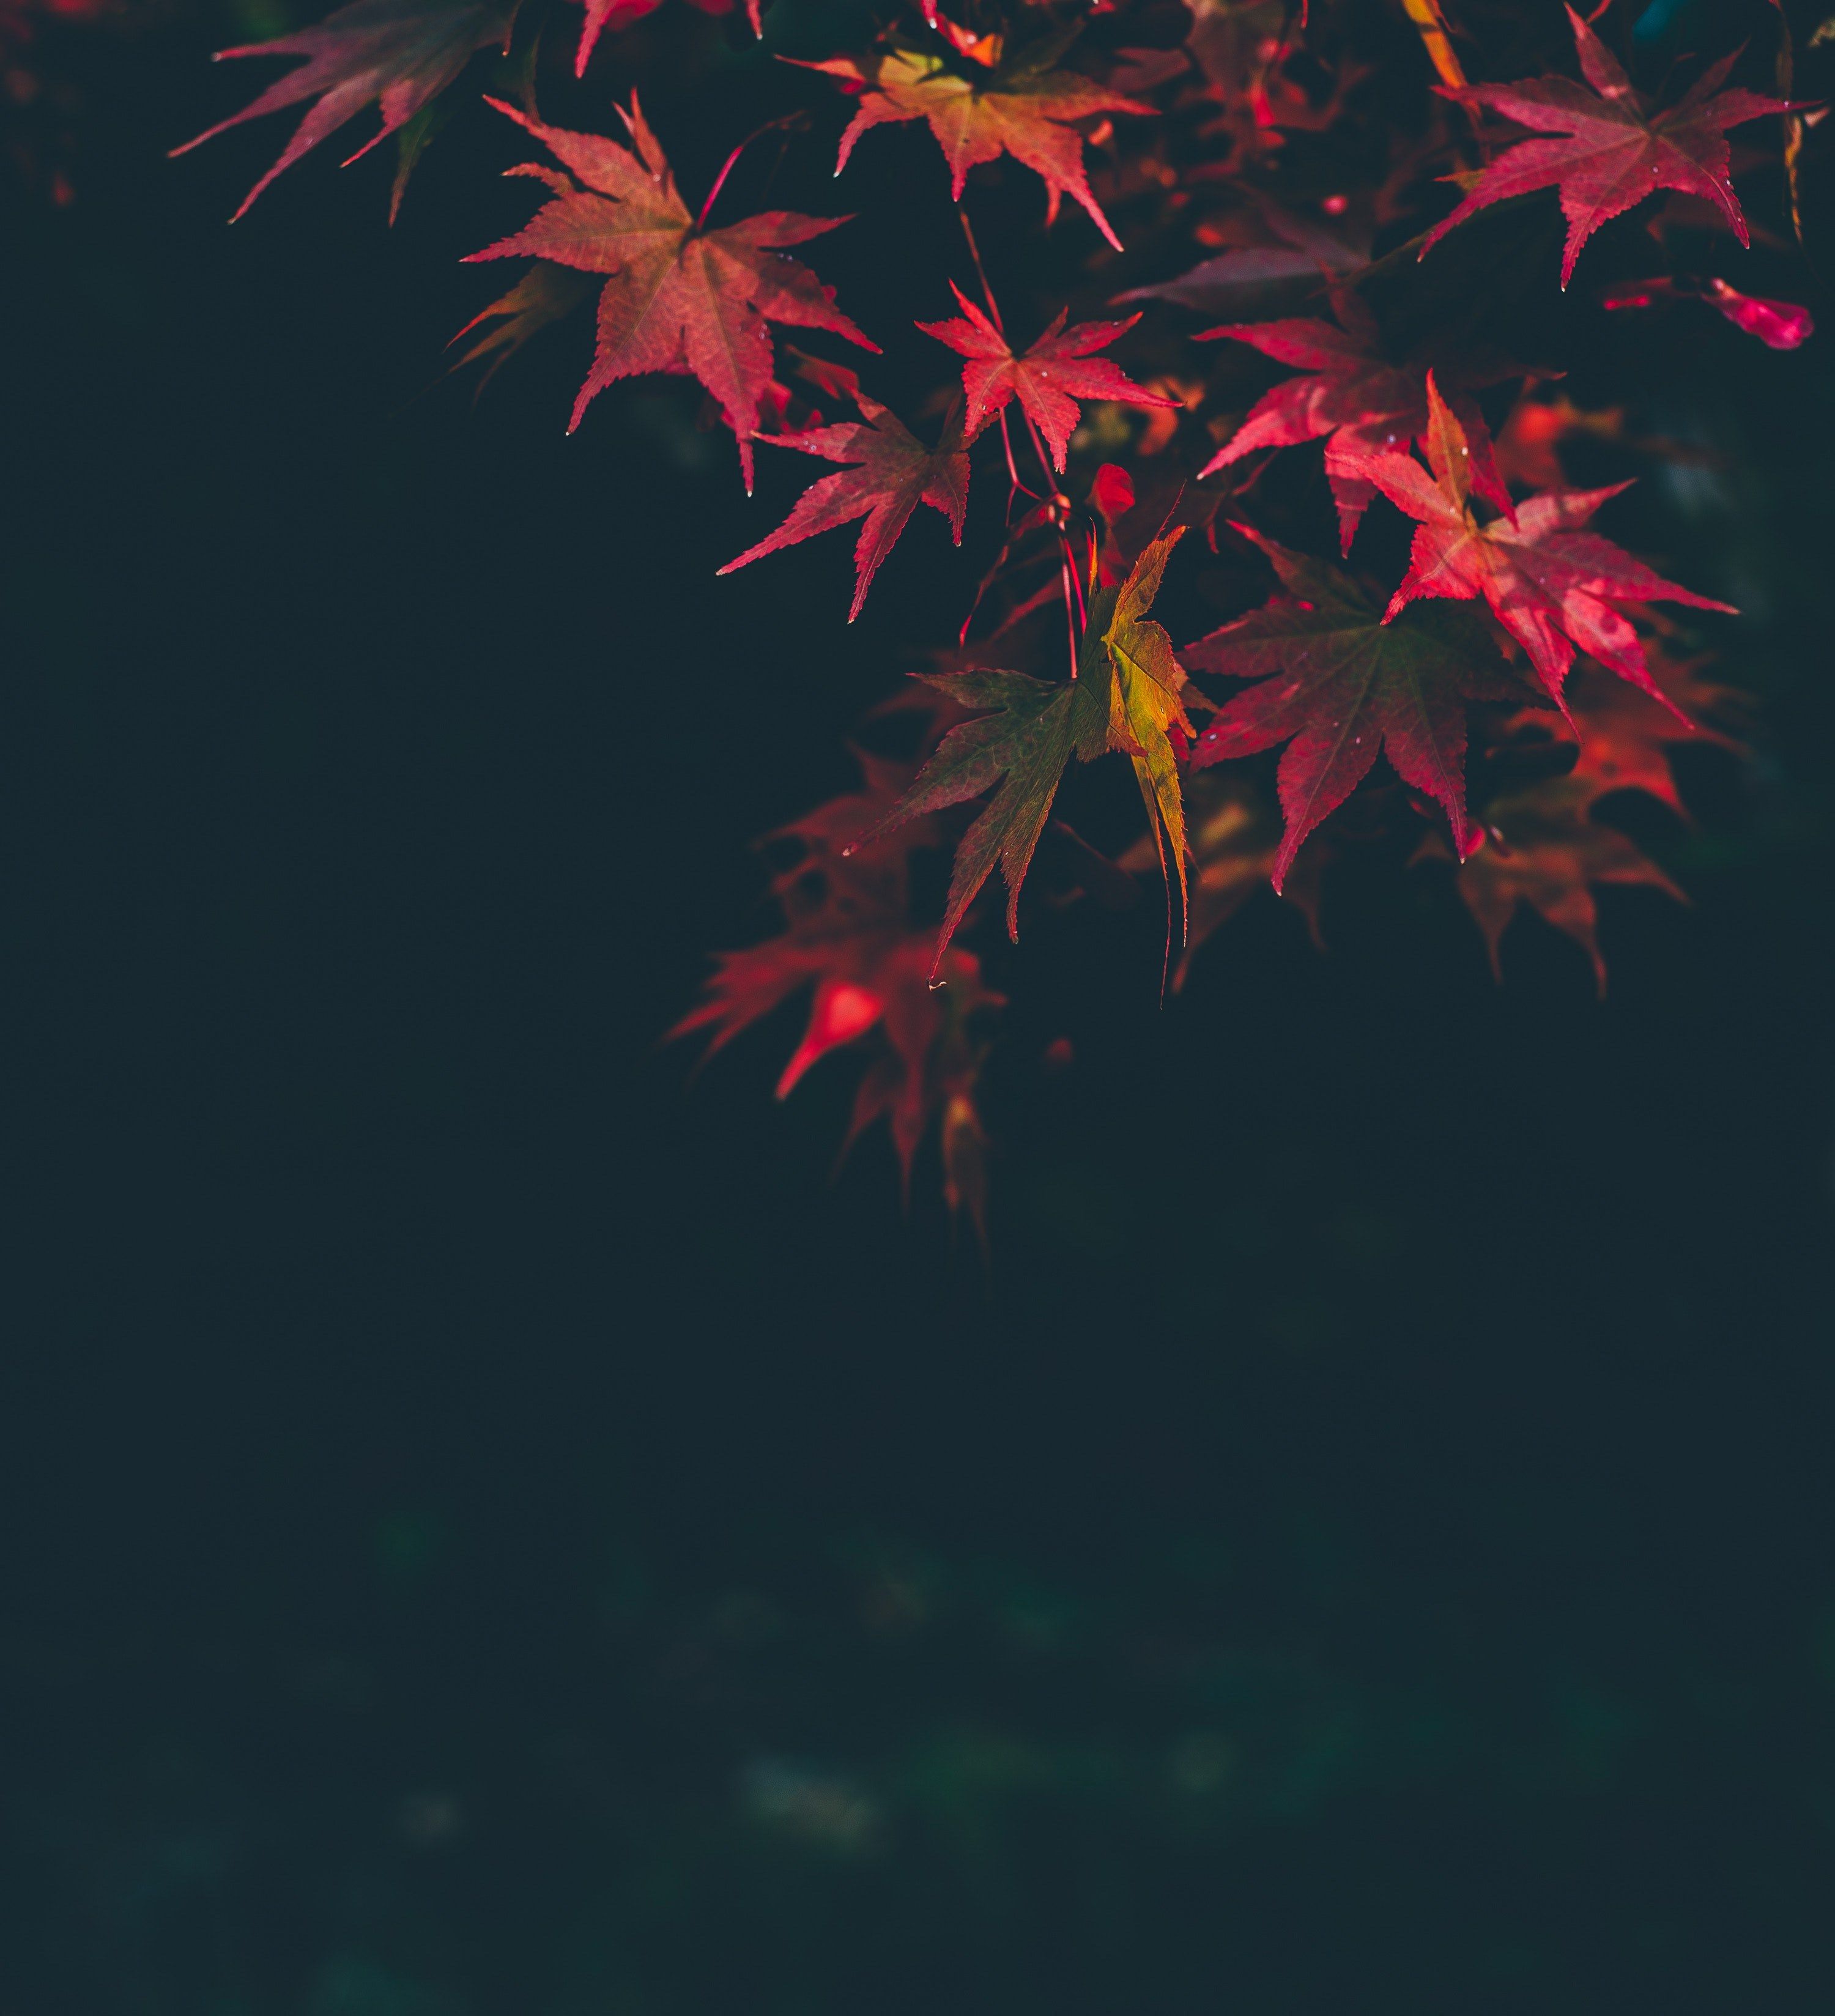 Wallpaper / leaf fall maple leaves and autumn HD 4k wallpaper